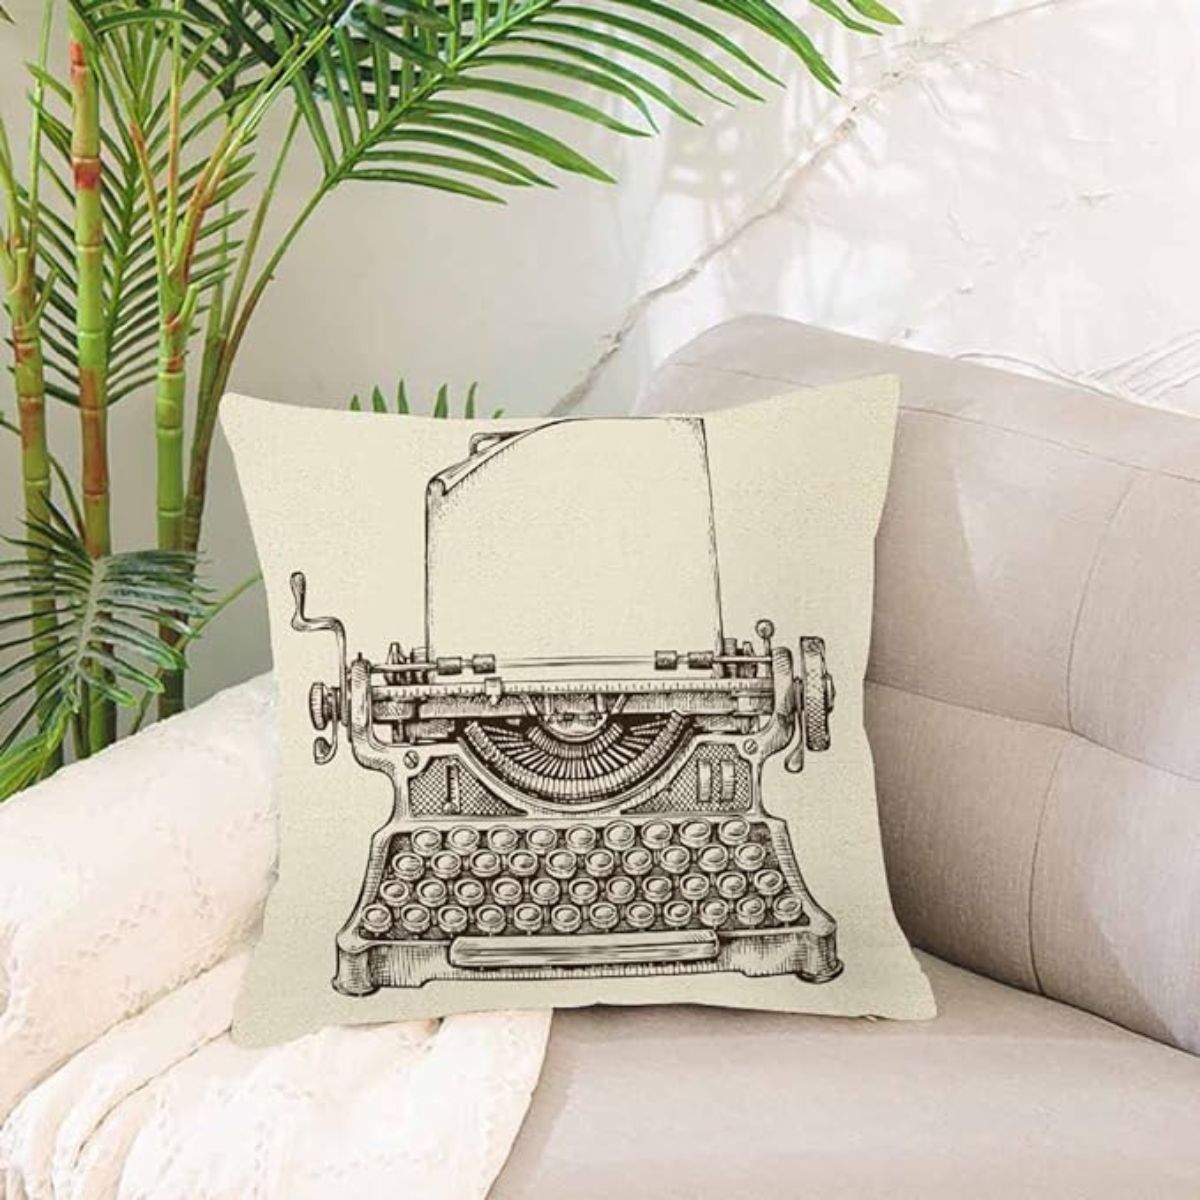 18 Inches Vintage Typewriter Pillow Cover